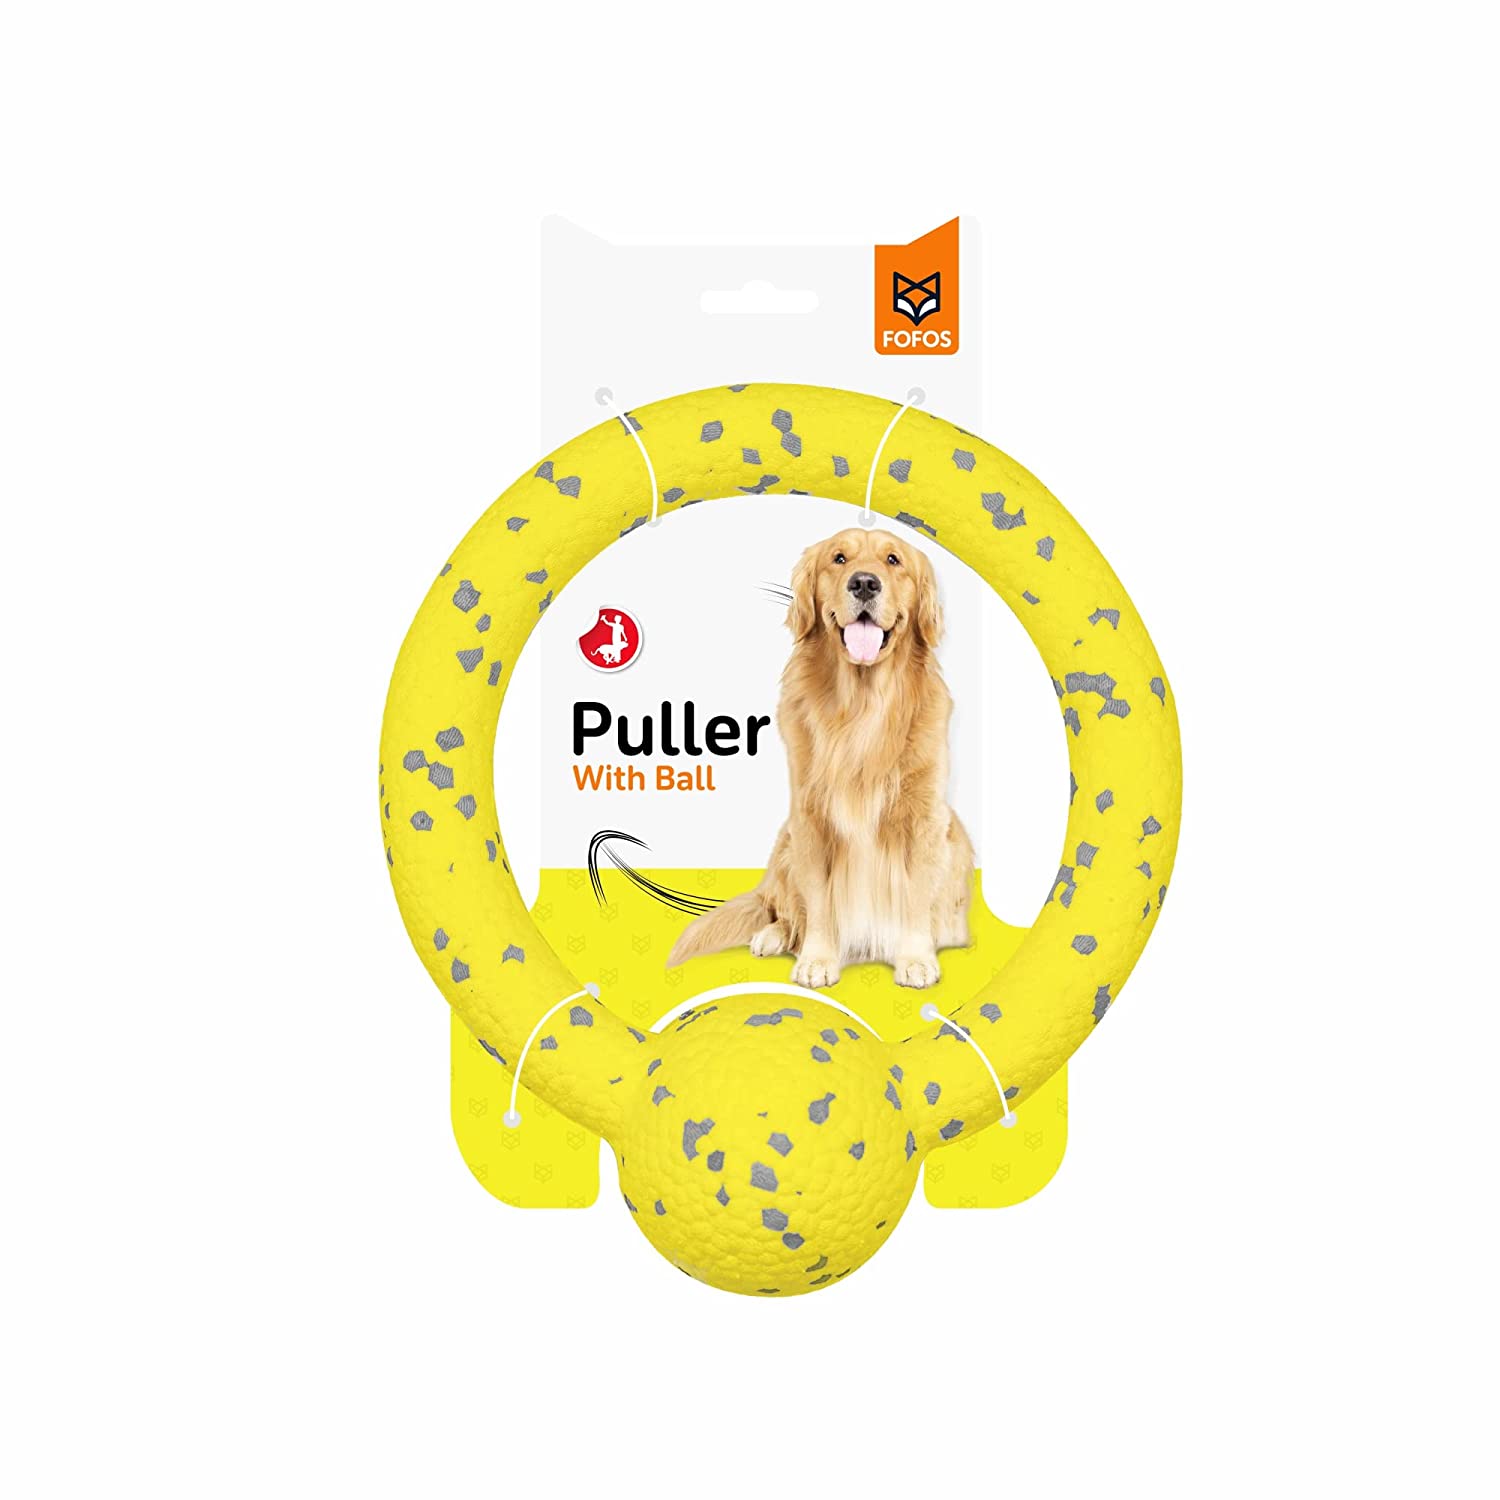 FOFOS Durable Puller Dog Toy – Dog Chew Toy